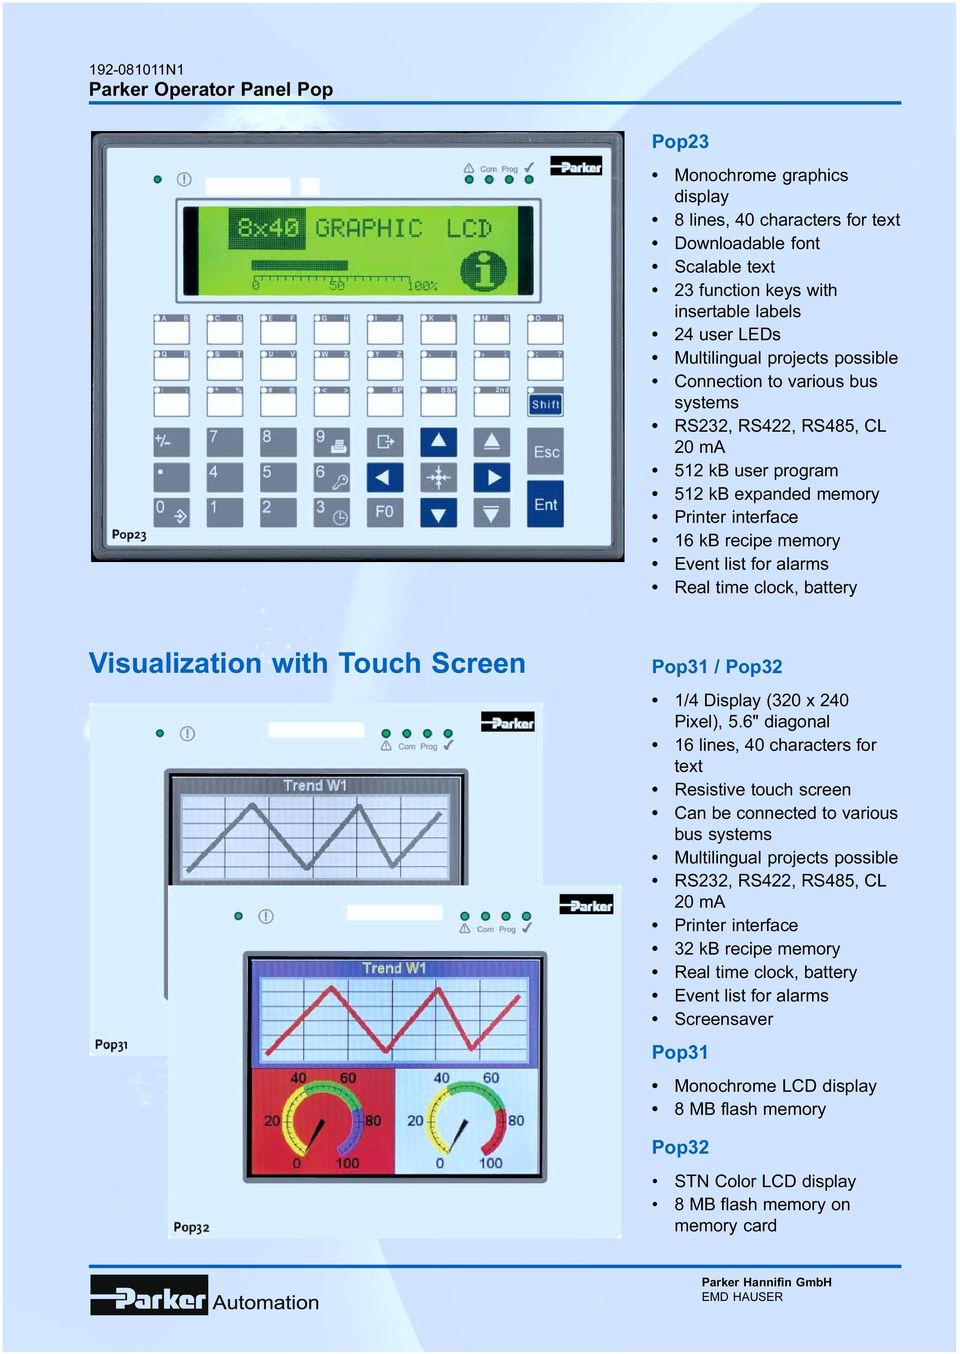 Visualization with Touch Screen Pop31 / Pop32 1/4 Display (320 x 240 Pixel), 5.